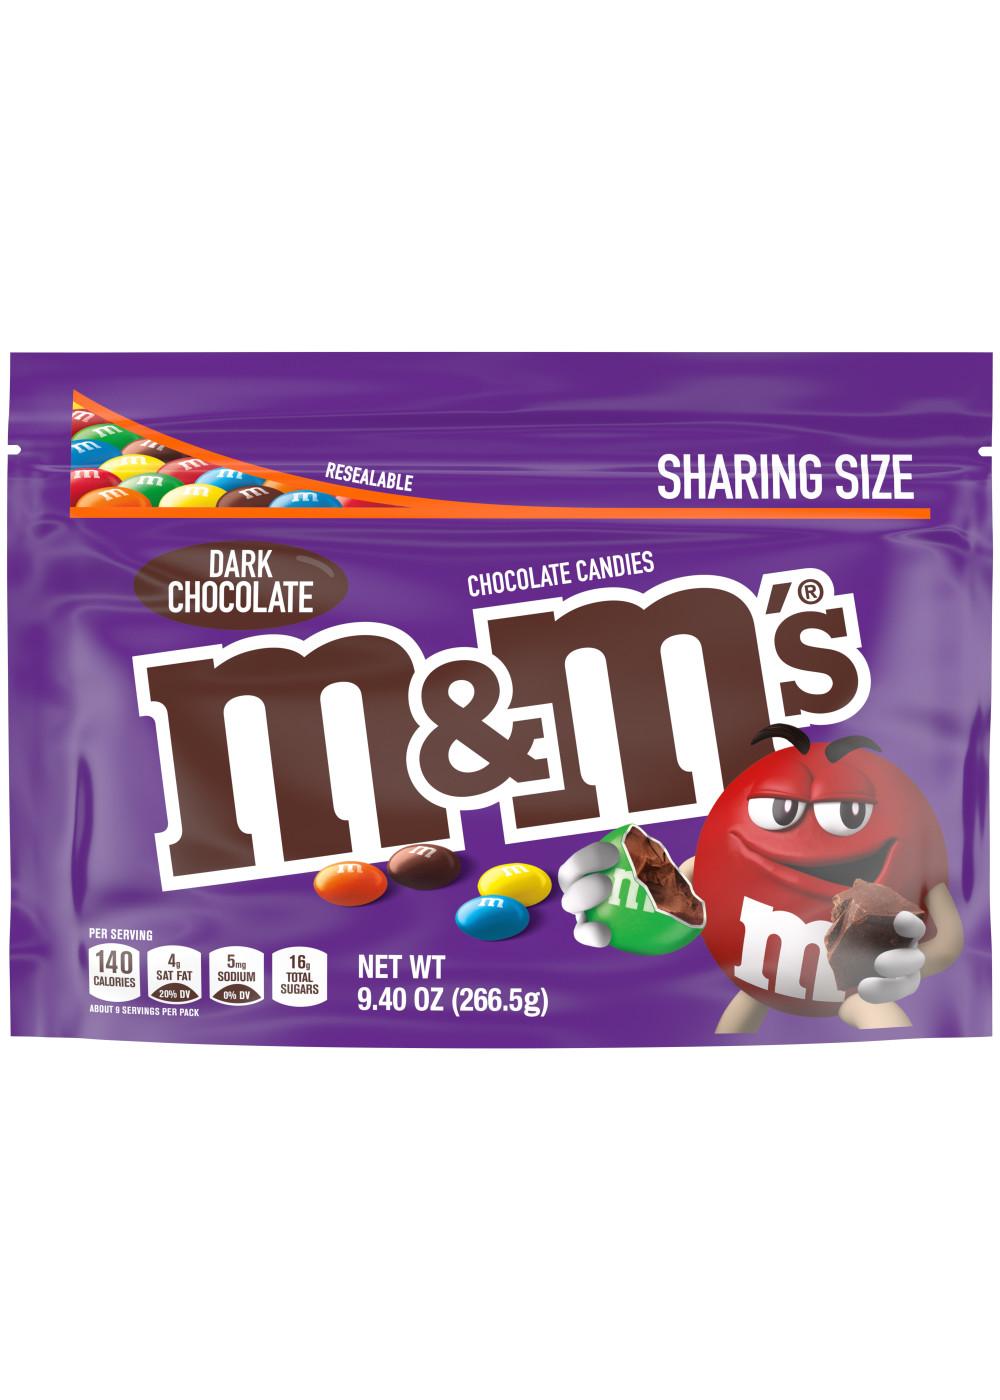 M&M'S Dark Chocolate Sharing Size Candy; image 1 of 7